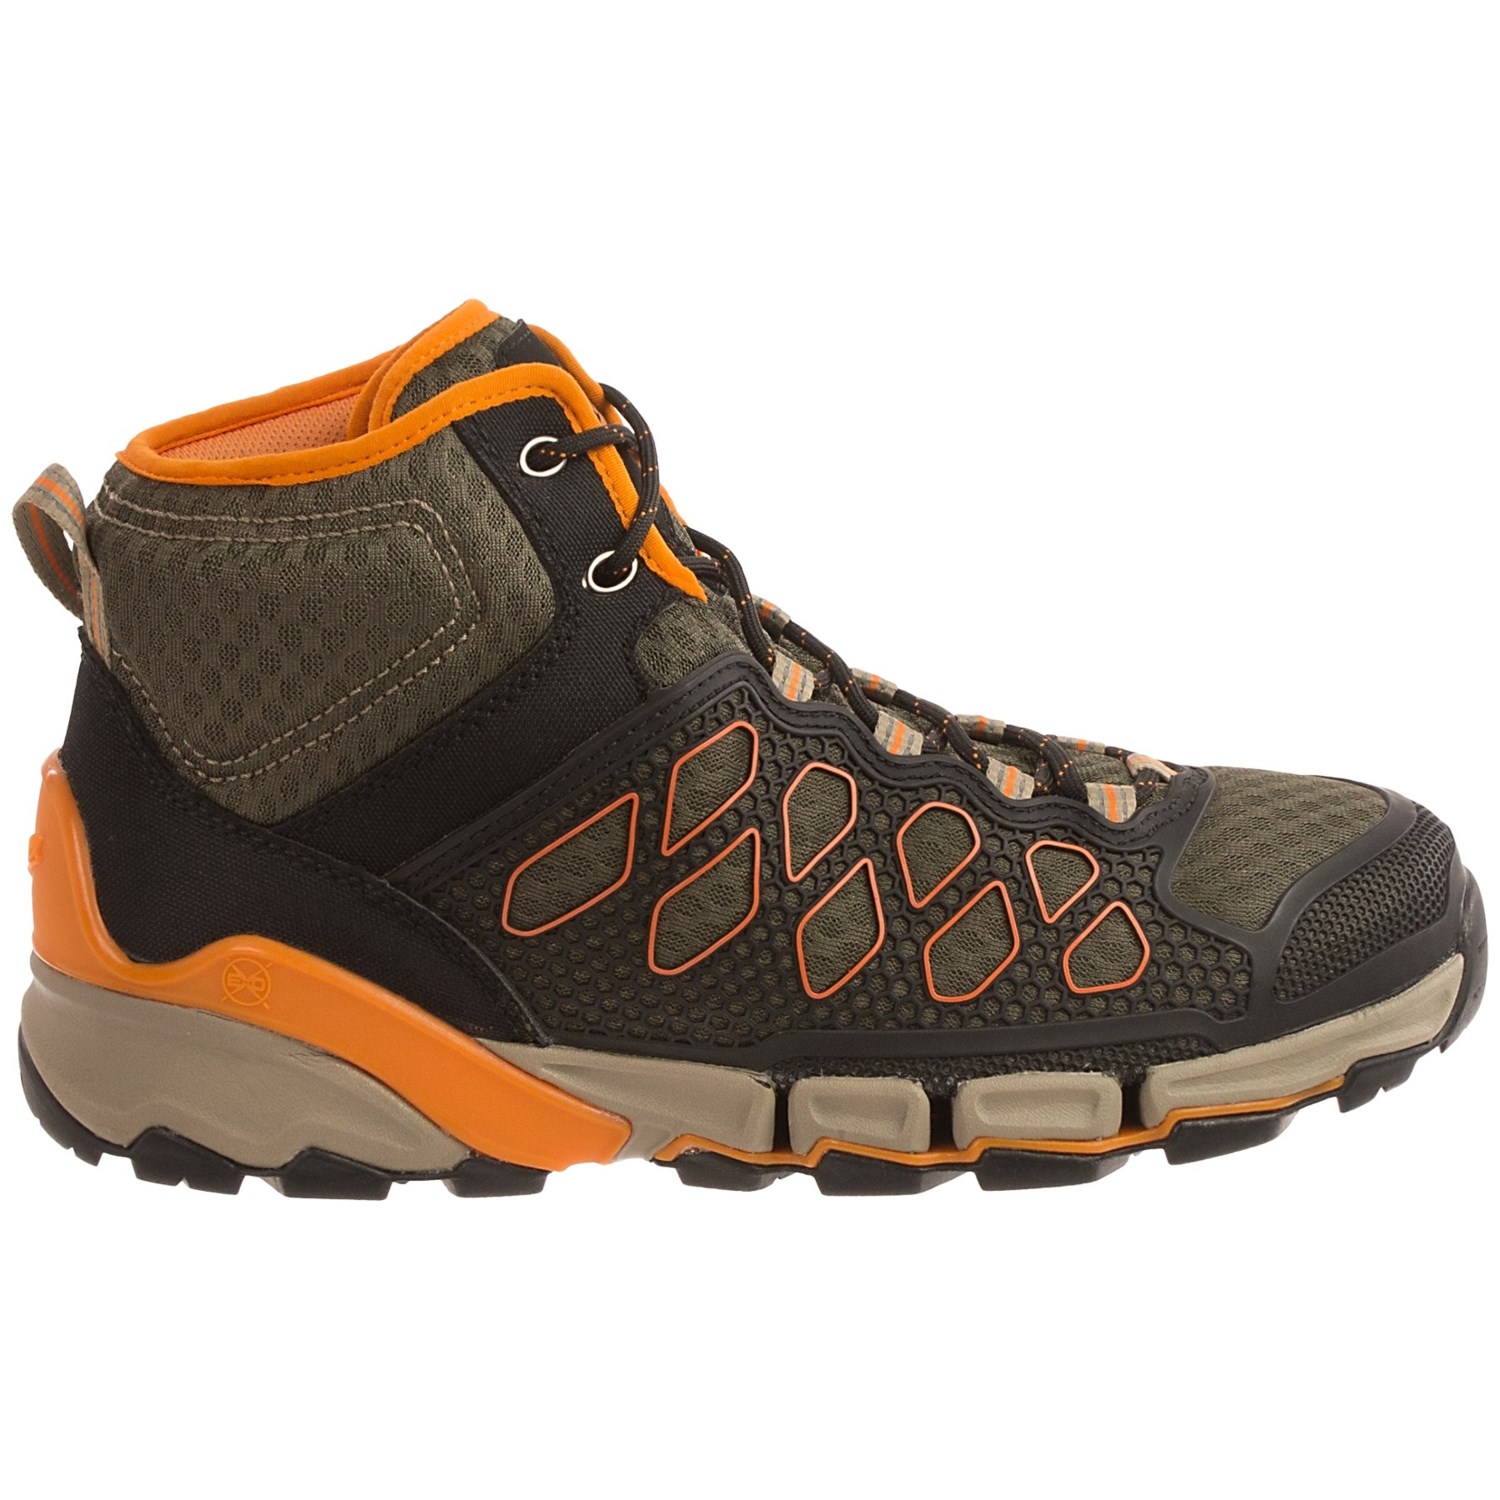 Danner Extrovert 4.5” Hiking Boots (For Men) - Save 38%